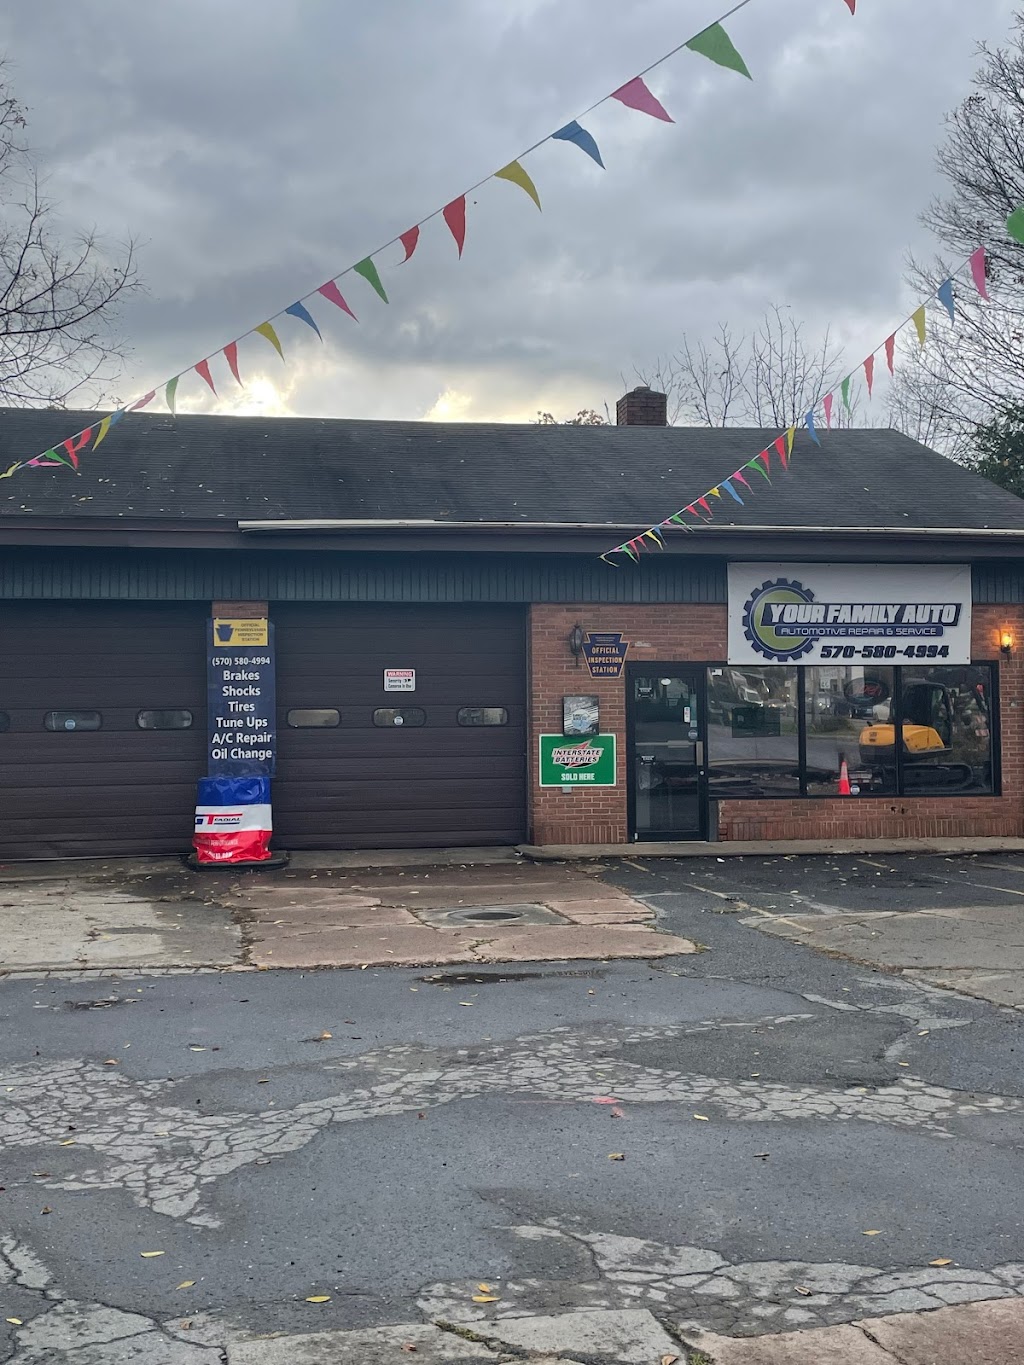 Your family auto | 351 Prospect St, East Stroudsburg, PA 18301 | Phone: (570) 238-9106